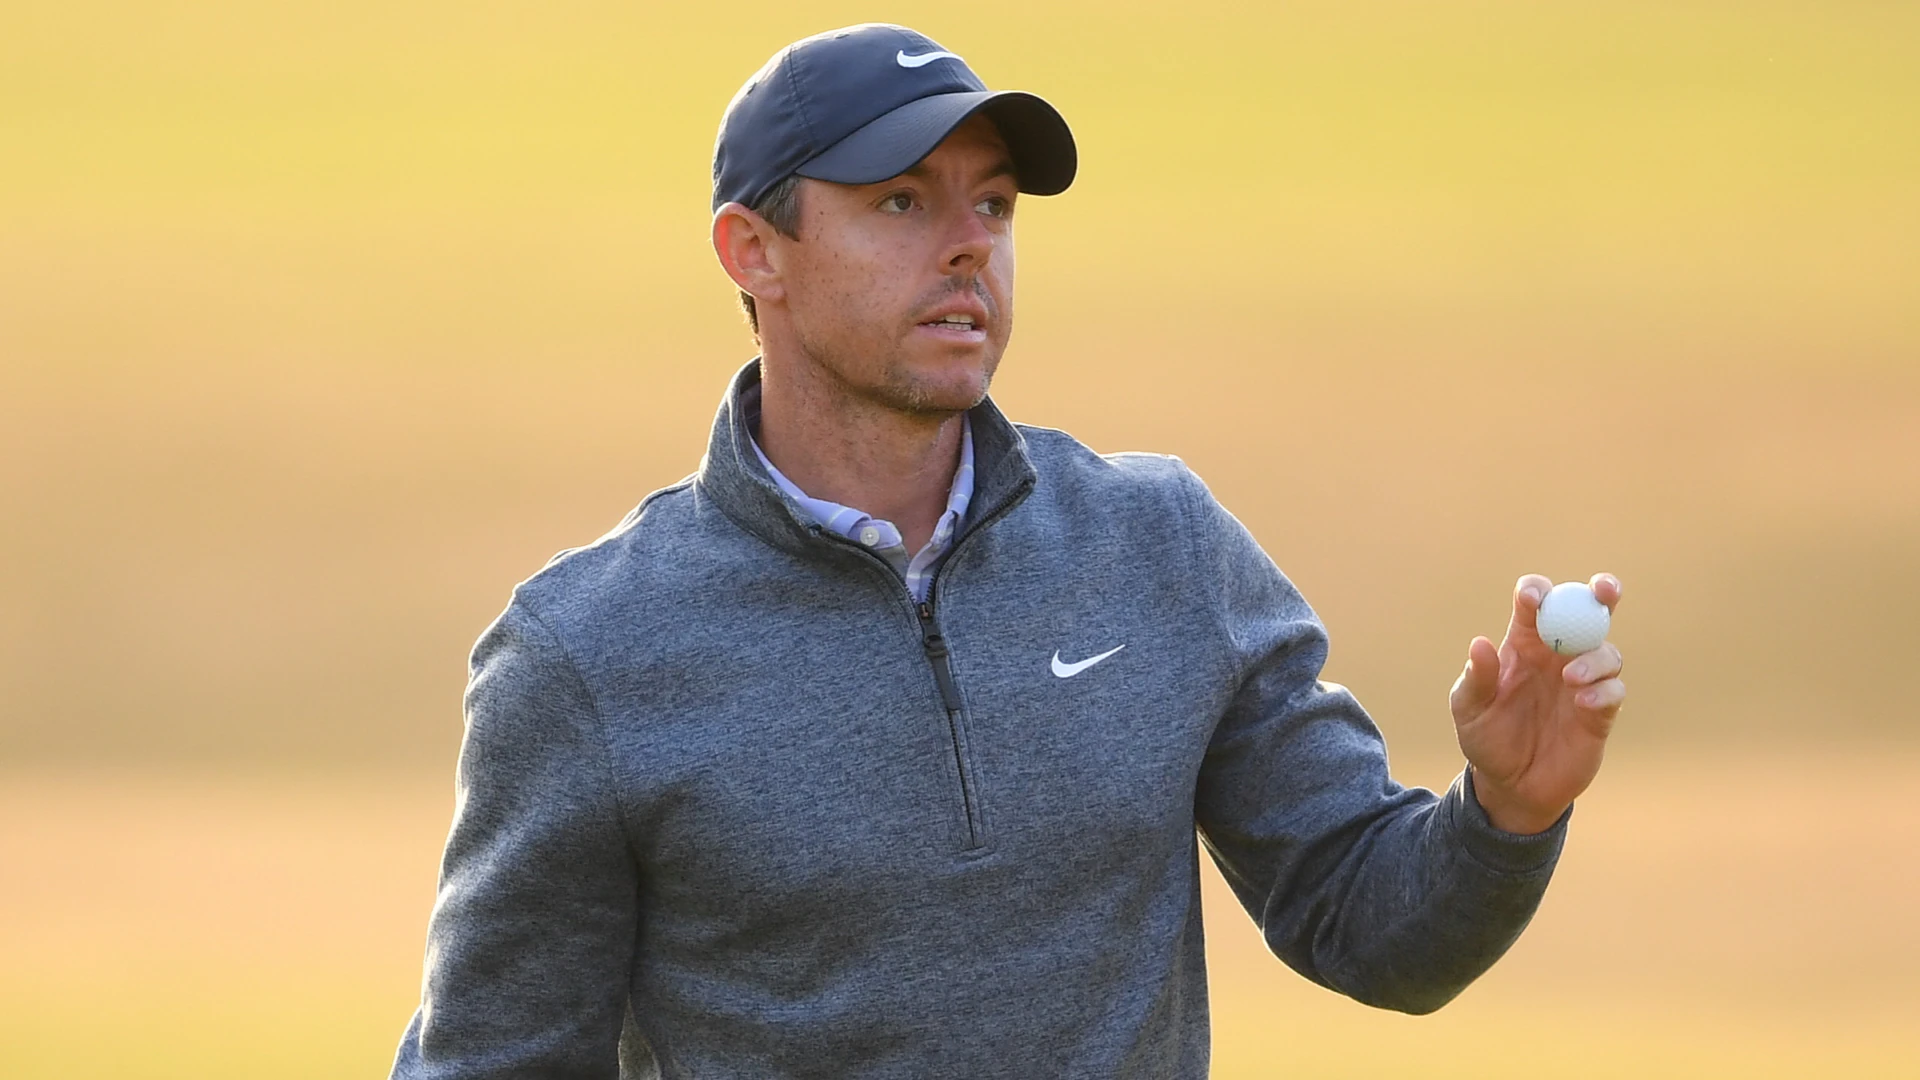 2022 British Open: Another major weekend, another chance for Rory McIlroy to end his major drought